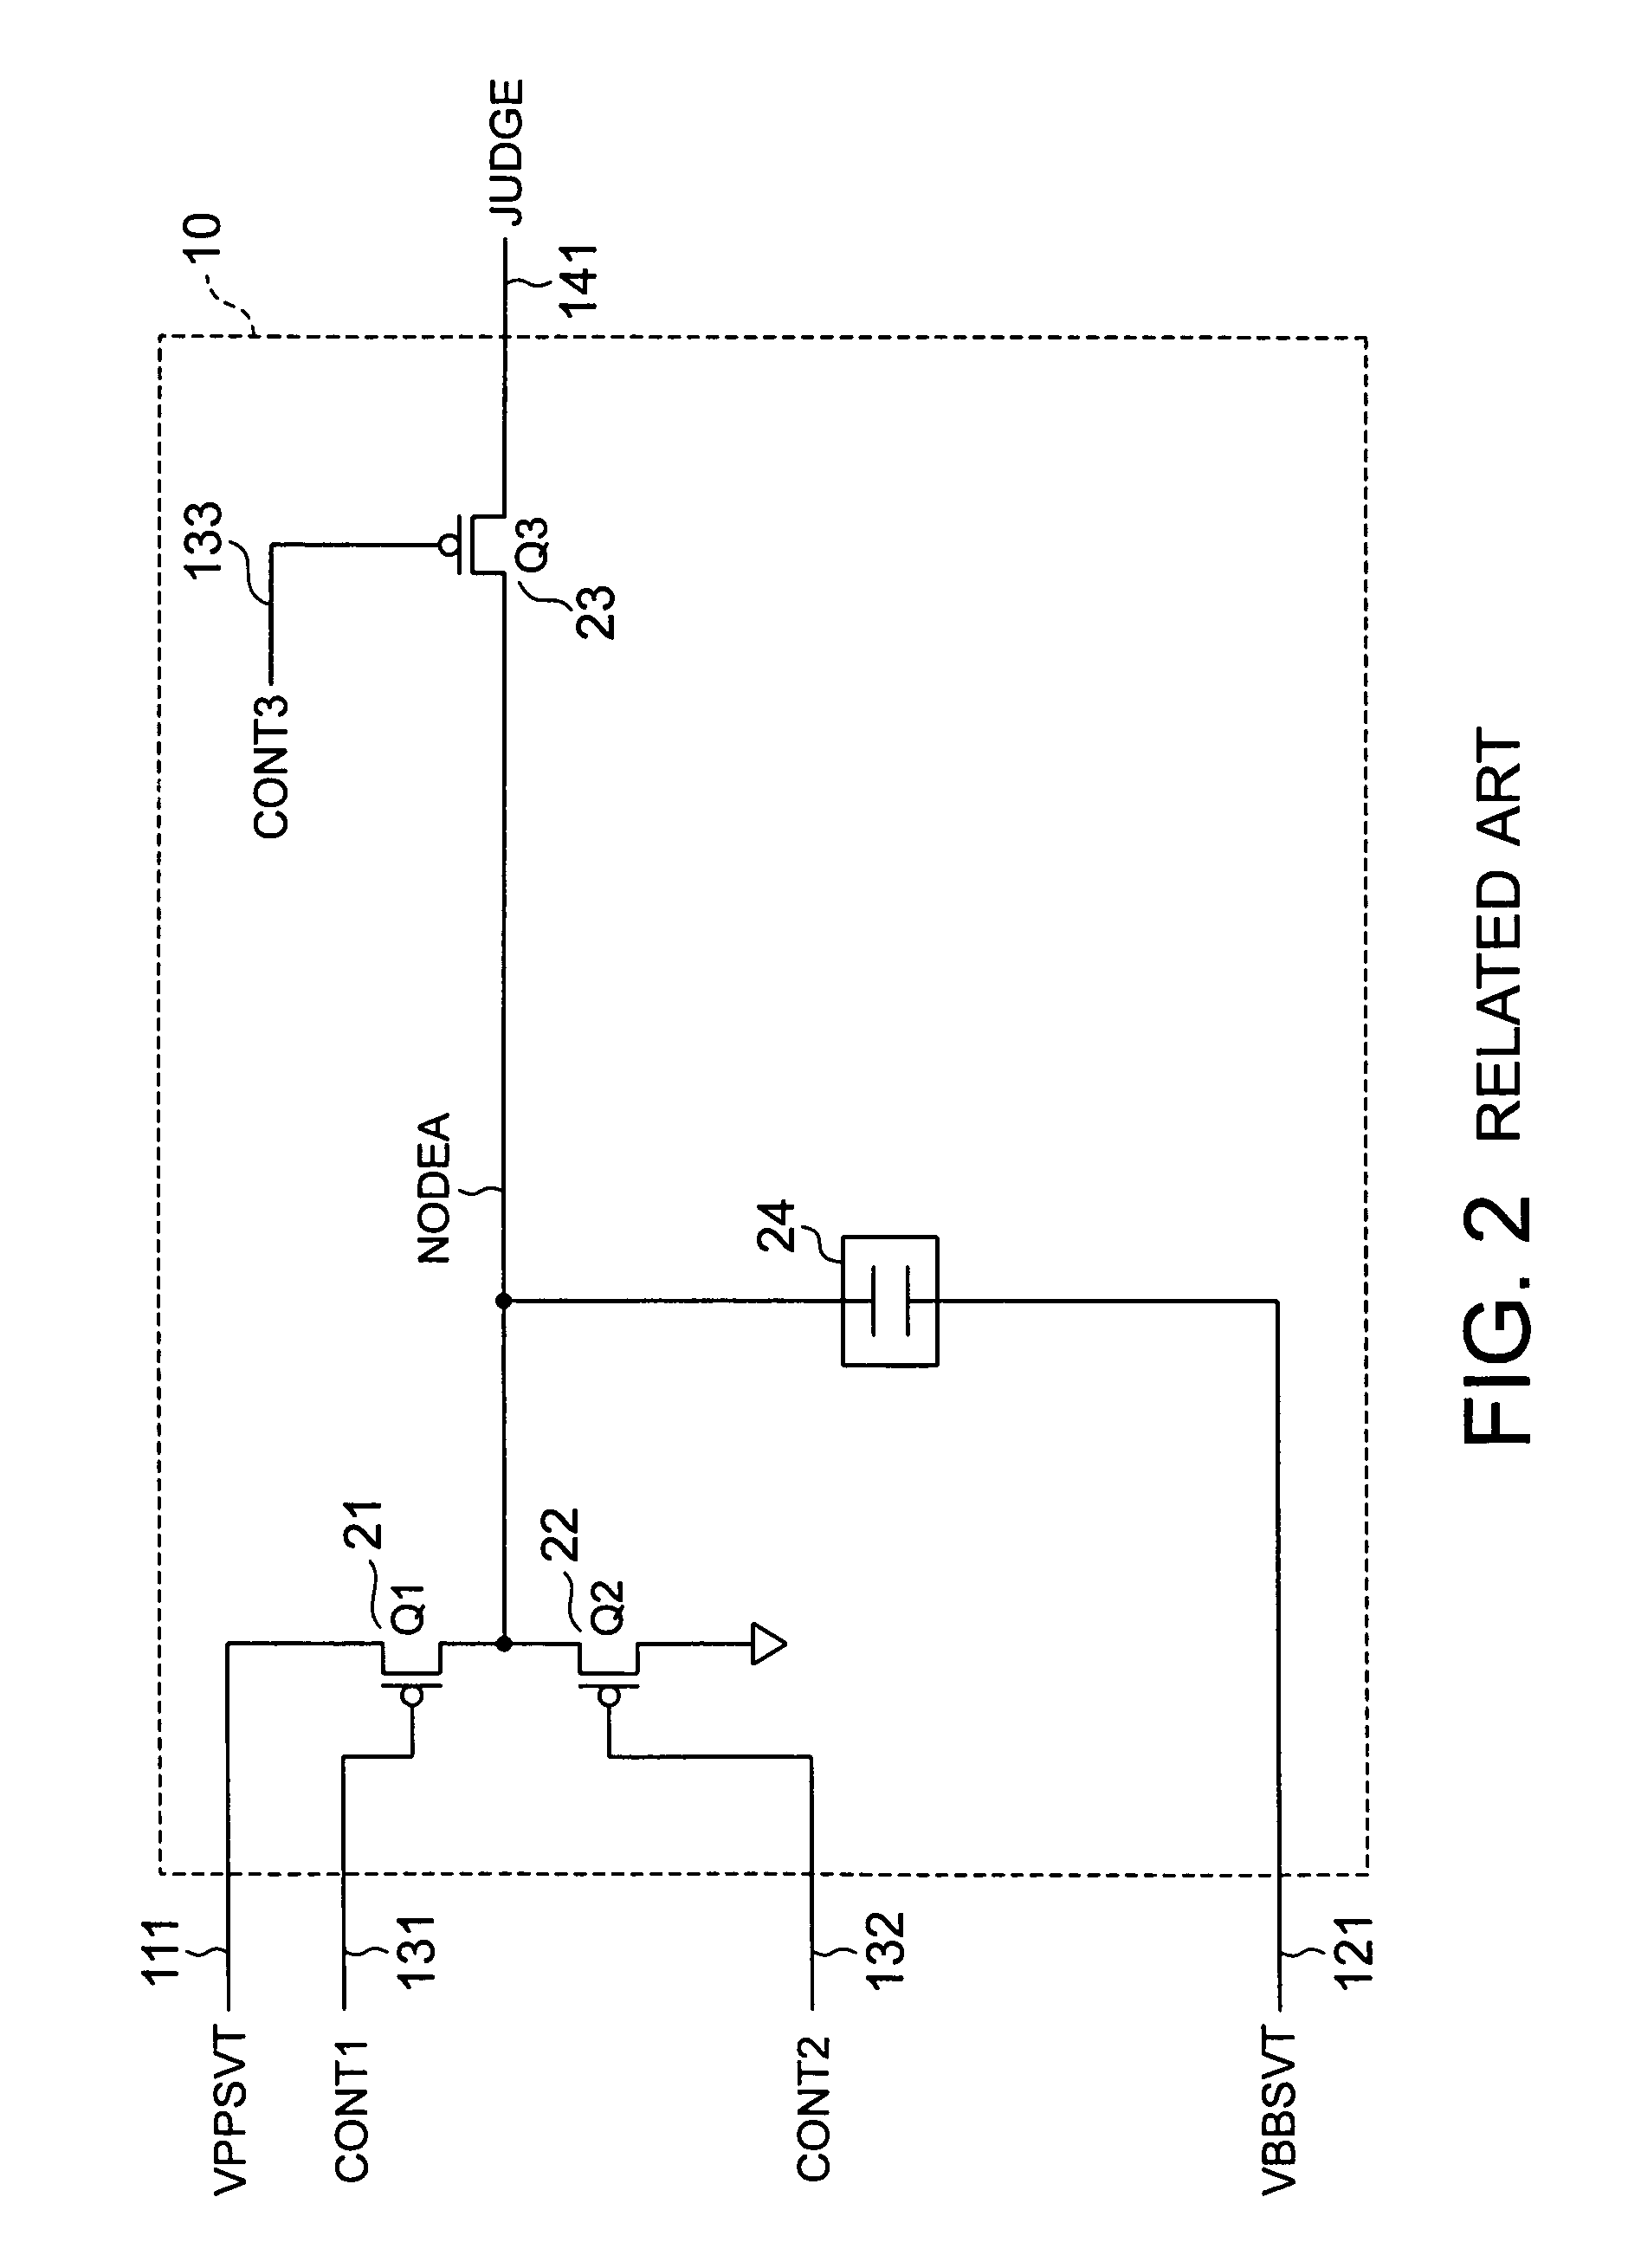 Semiconductor device having two fuses in parallel